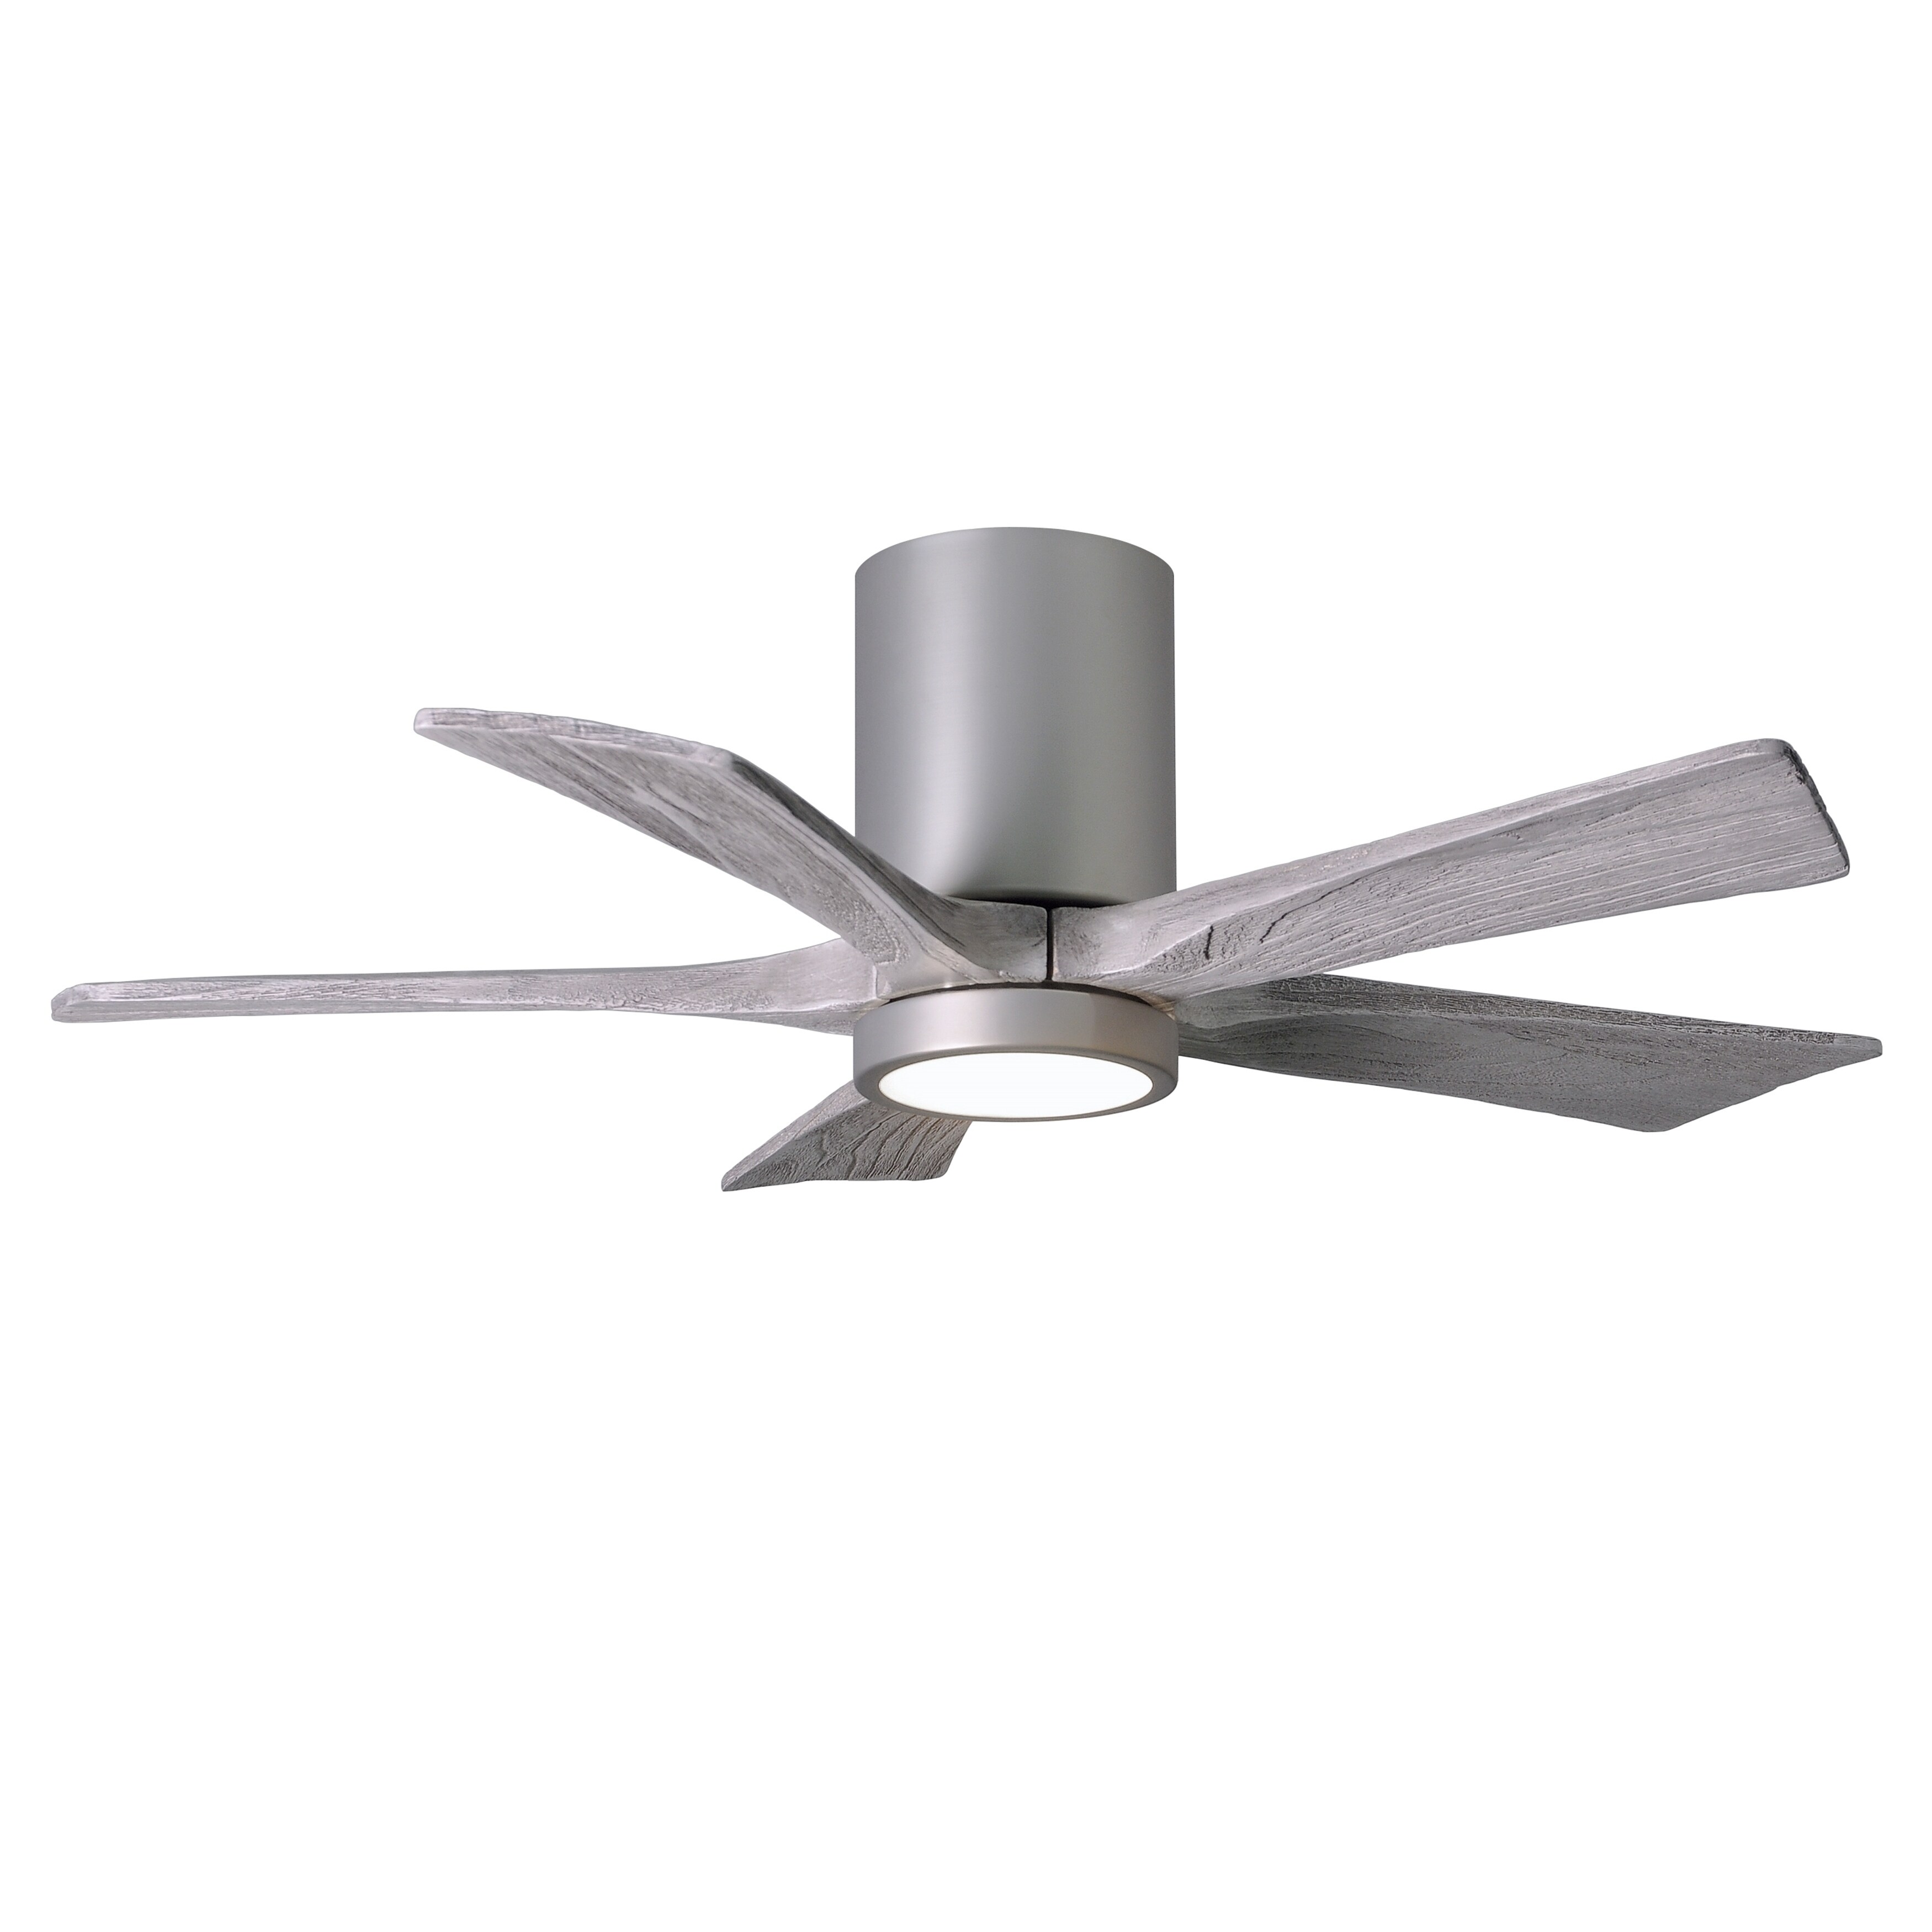 Satin Nickel or White Oil Rubbed Bronze 42 Inch Ceiling Fan with Light Kit 